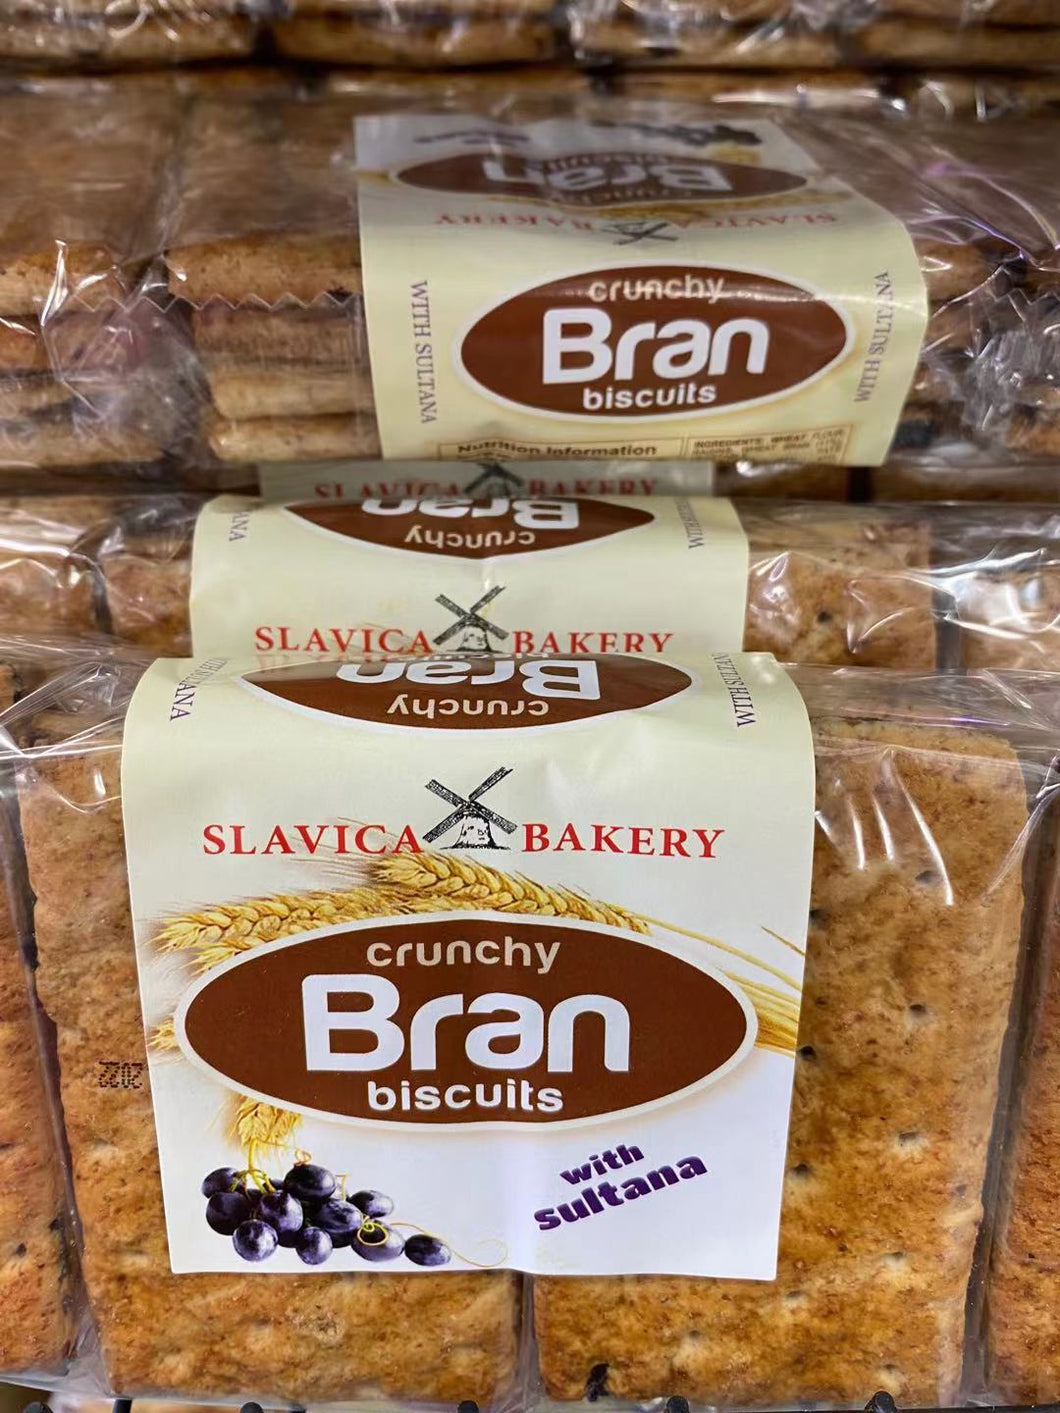 SLAVICA Bran Biscuits with Sultana